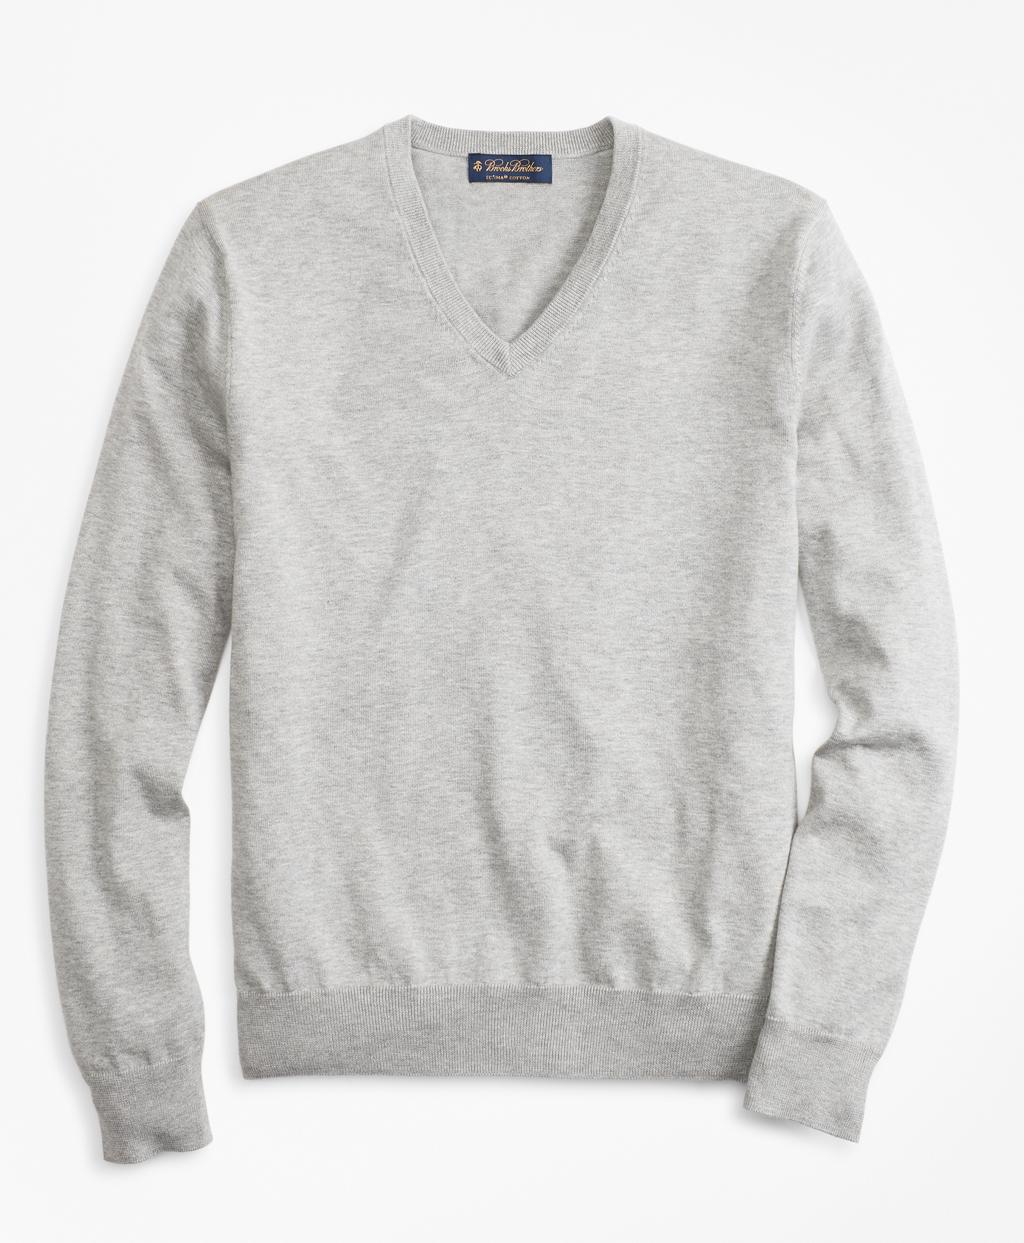 Brooks Brothers Supima Cotton V-neck Sweater in Gray for Men - Save 11% ...